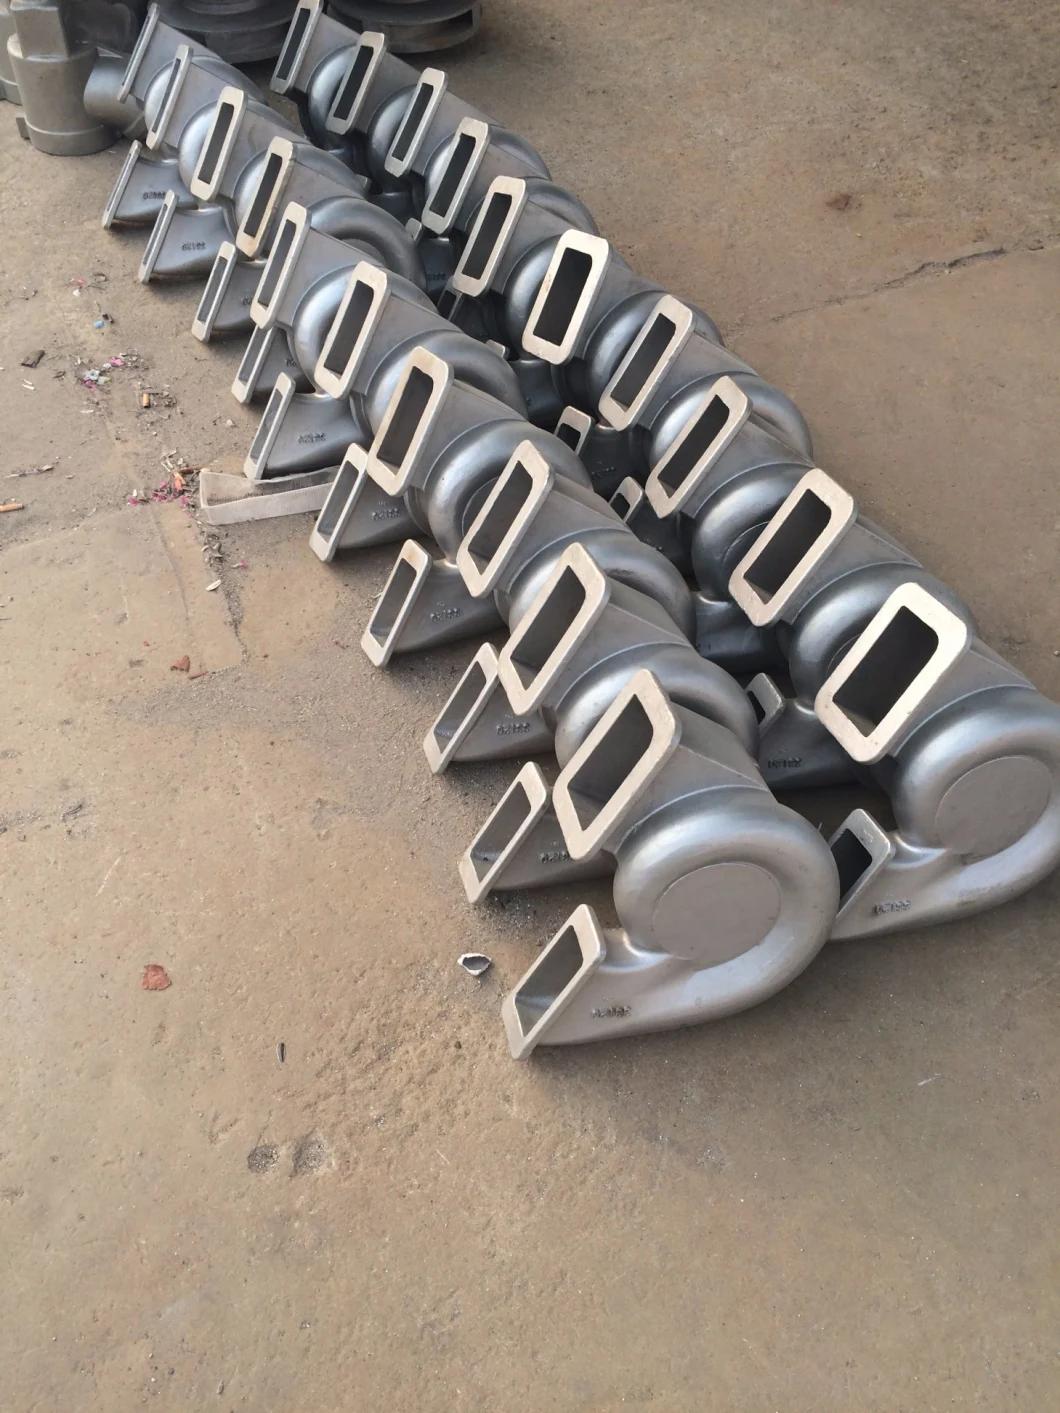 Resin Sand Cast Iron Stainless Steel Casting Pump Parts